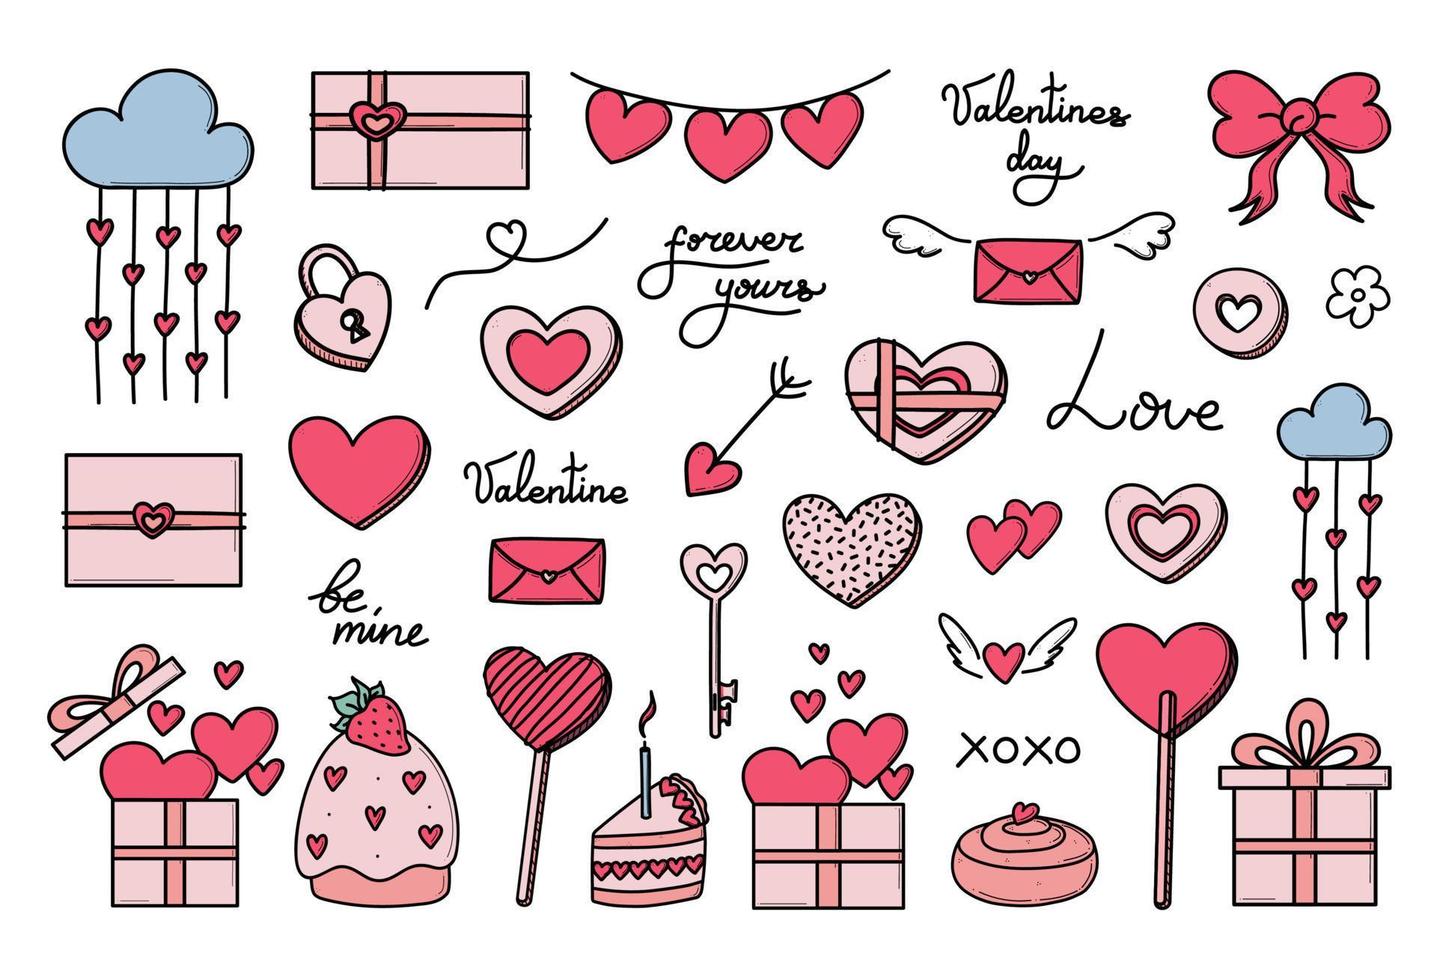 Valentines day vector hand drawn set of doodles. Cute romantic love icons for anniversary, wedding.